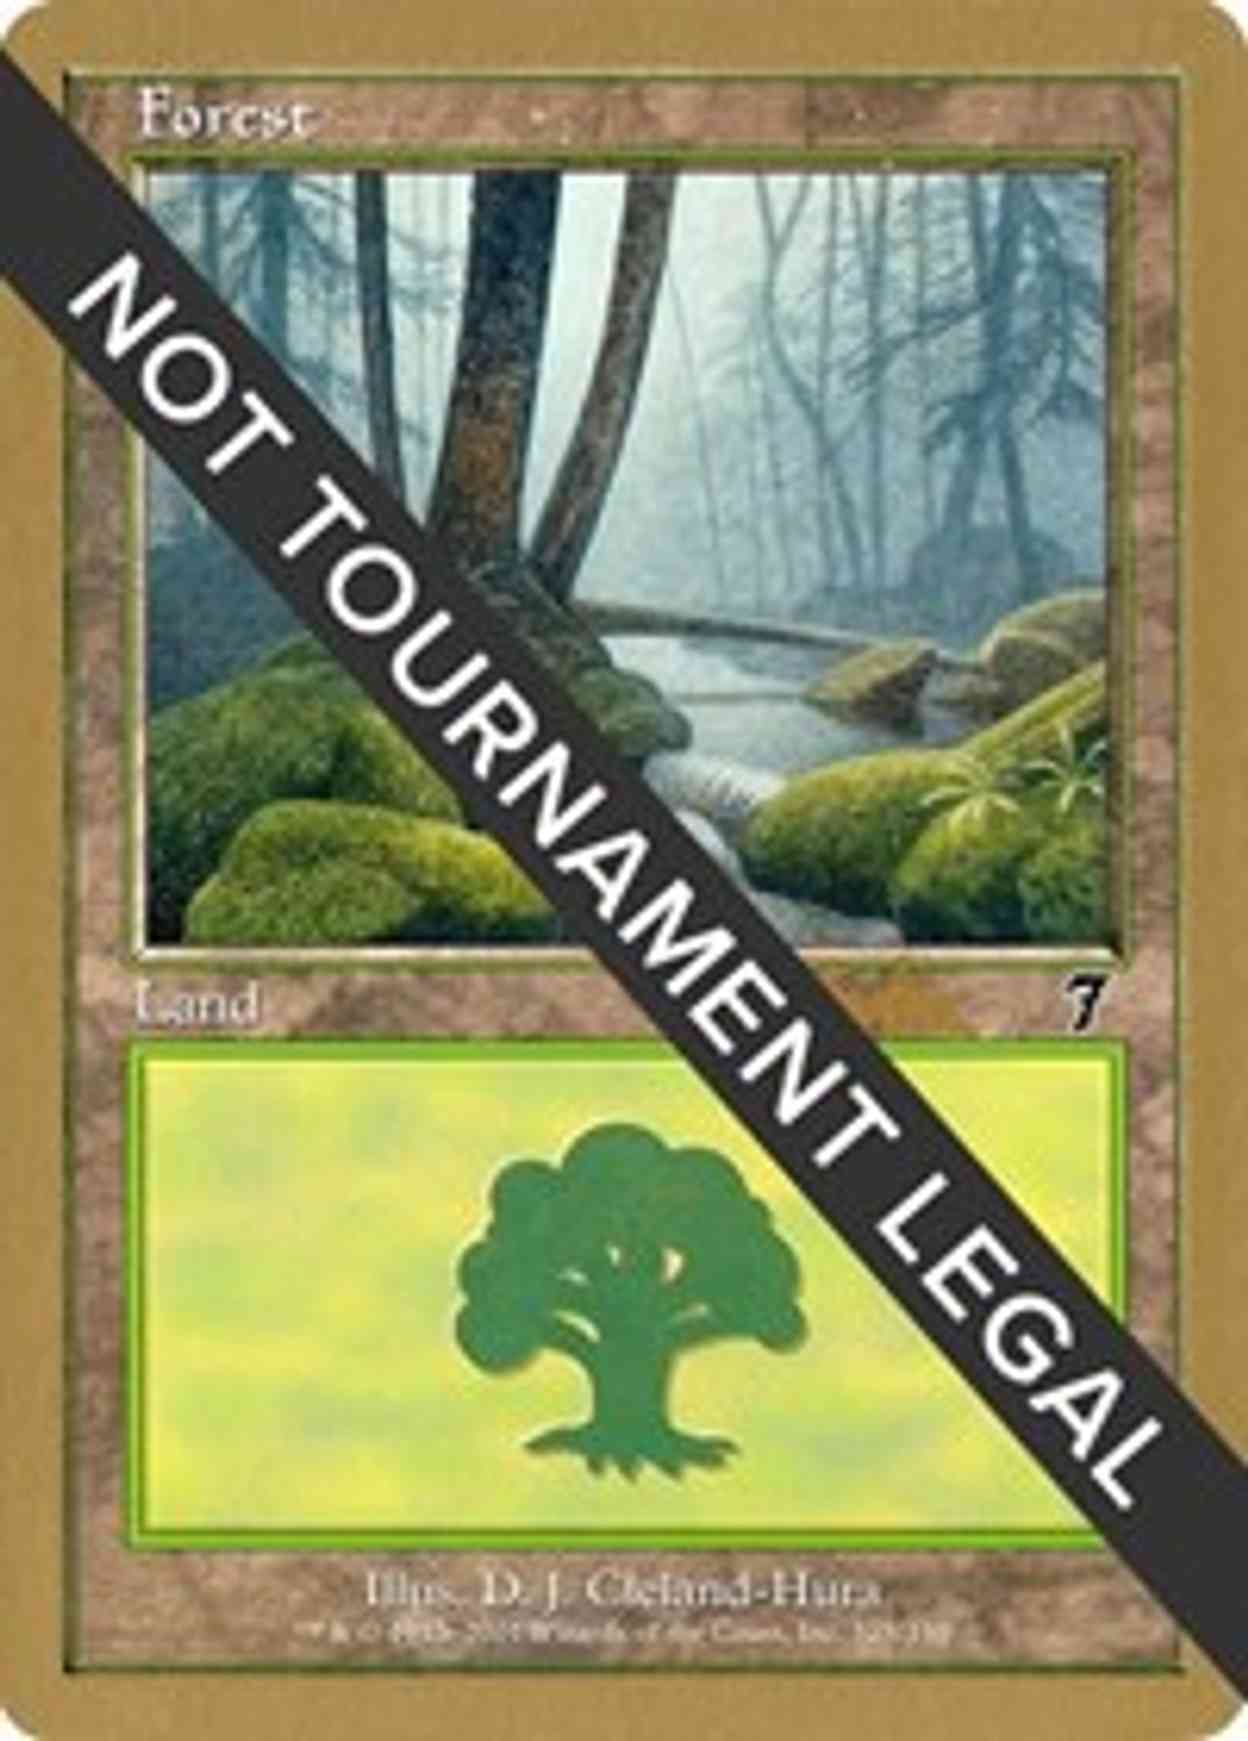 Forest (328) - 2002 Brian Kibler (7ED) magic card front